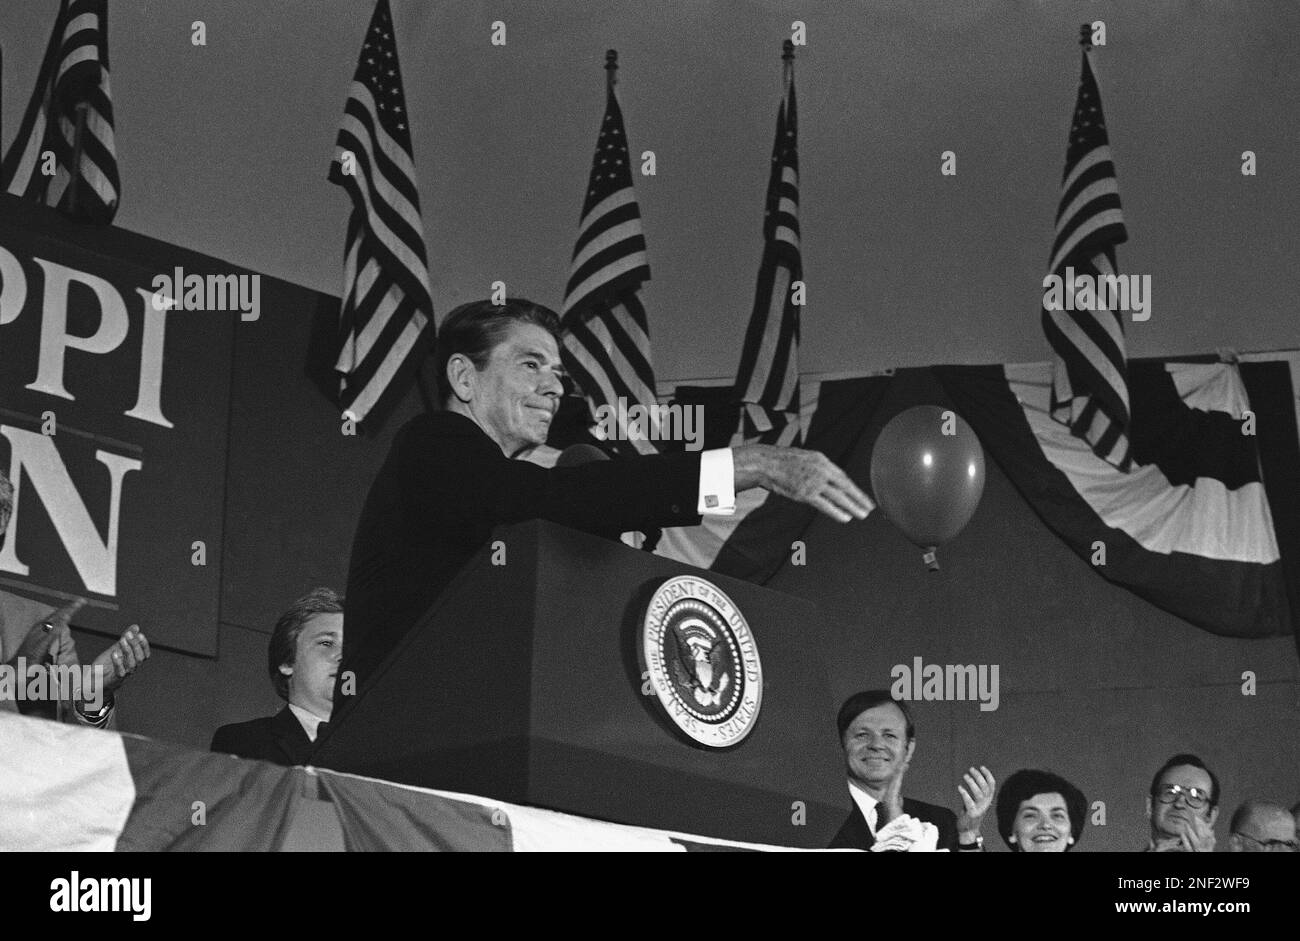 U.S. President Ronald Reagan swats away a balloon during the closing  moments of a campaign rally in evening, Monday, Oct. 1, 1984 in Gulfport,  Miss. Reagan, on a campaign swing through Mississippi,